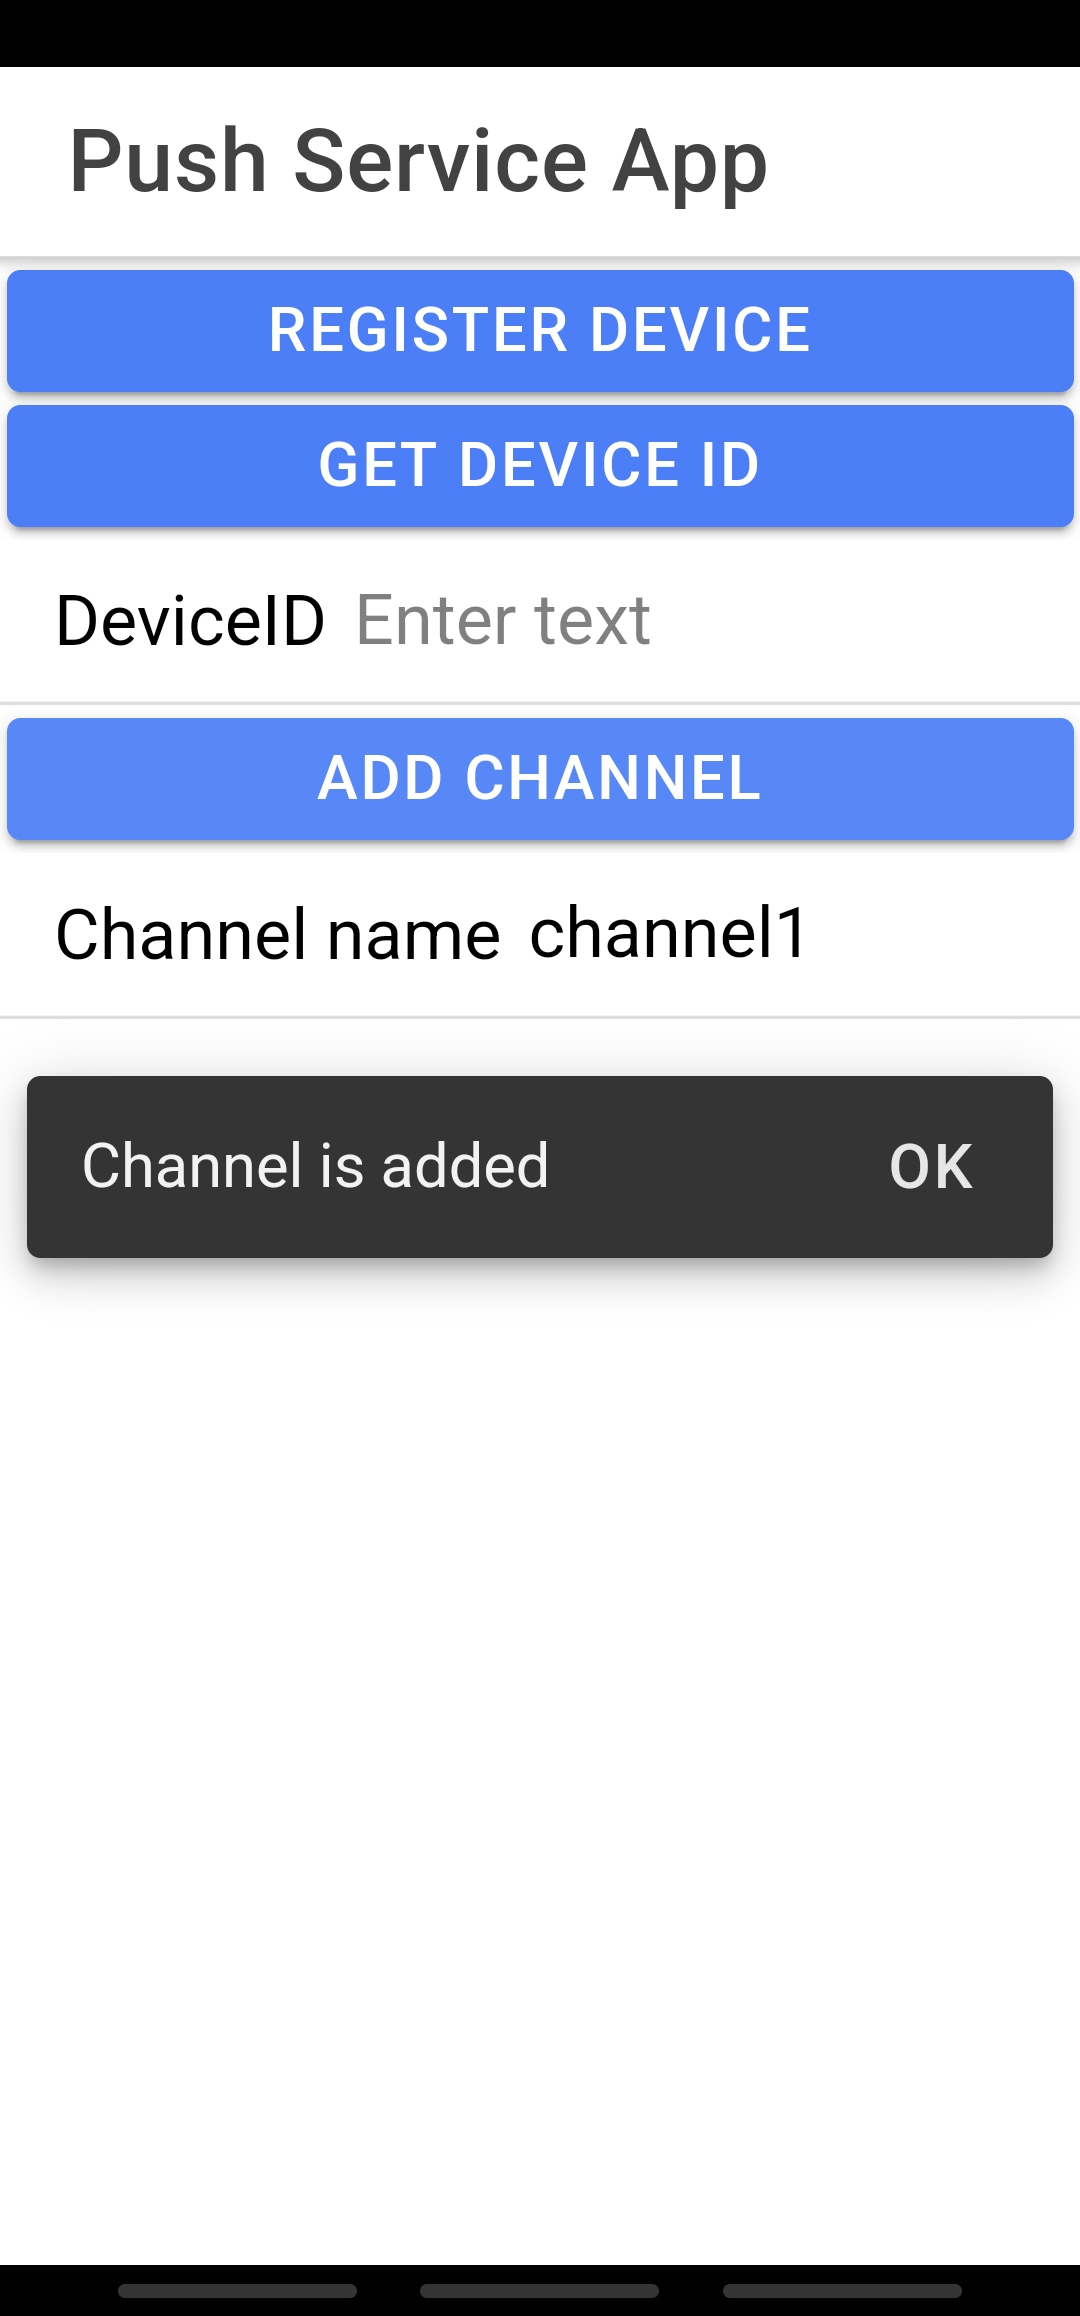 Channel added to an Android device